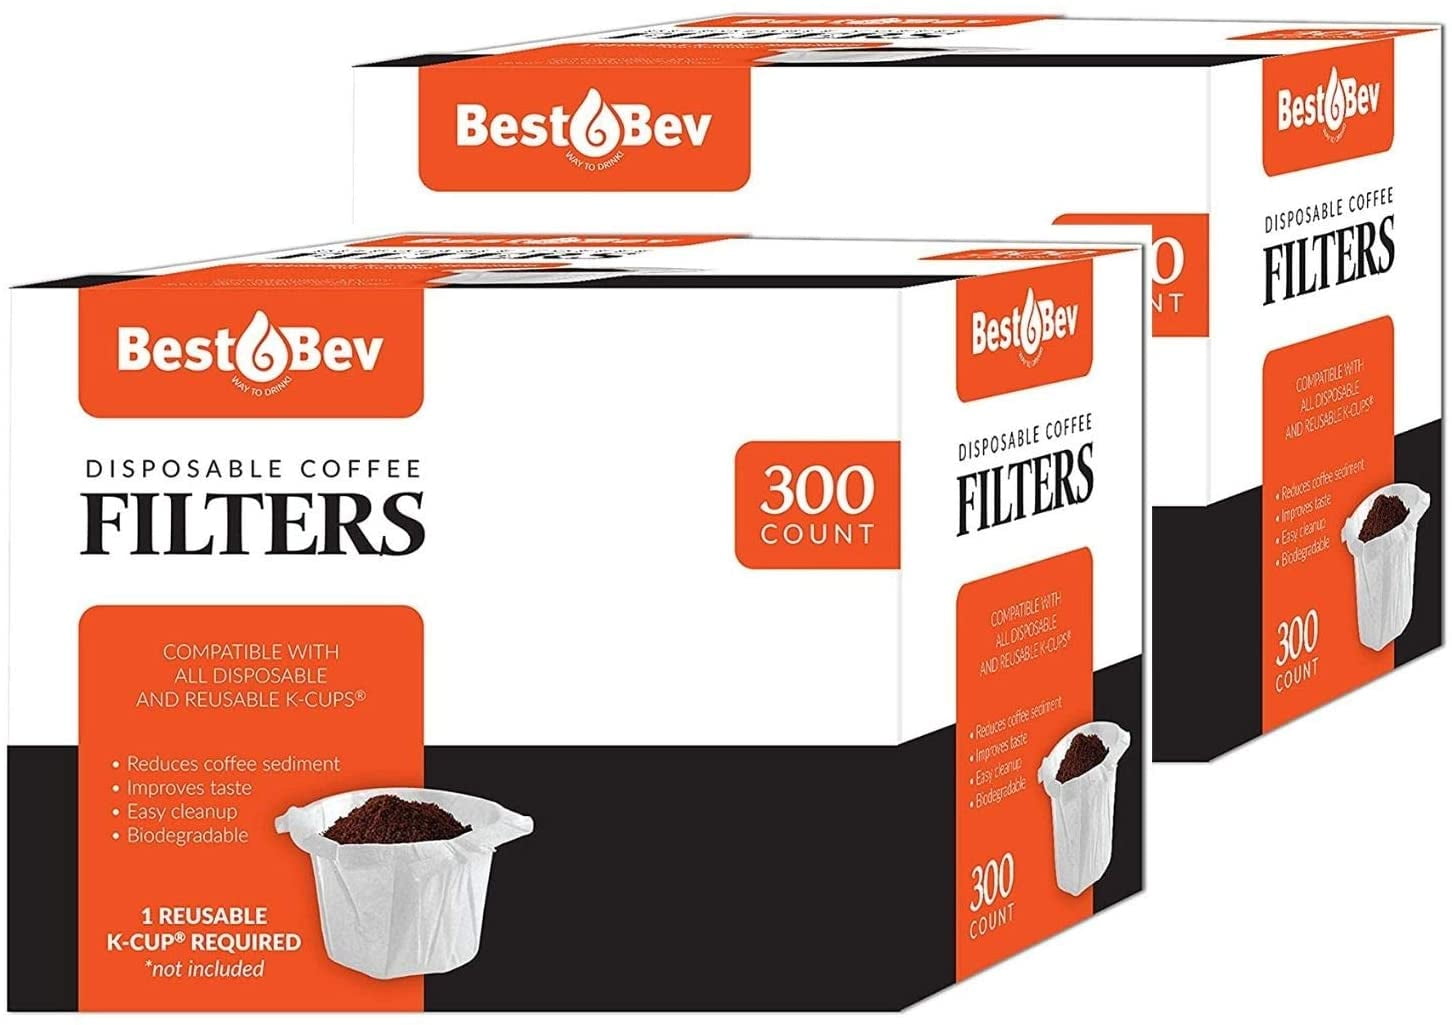 200-Ct EZ-Cup Disposable Paper Filter for Keurig Single Brew K-Cup Coffee Maker 